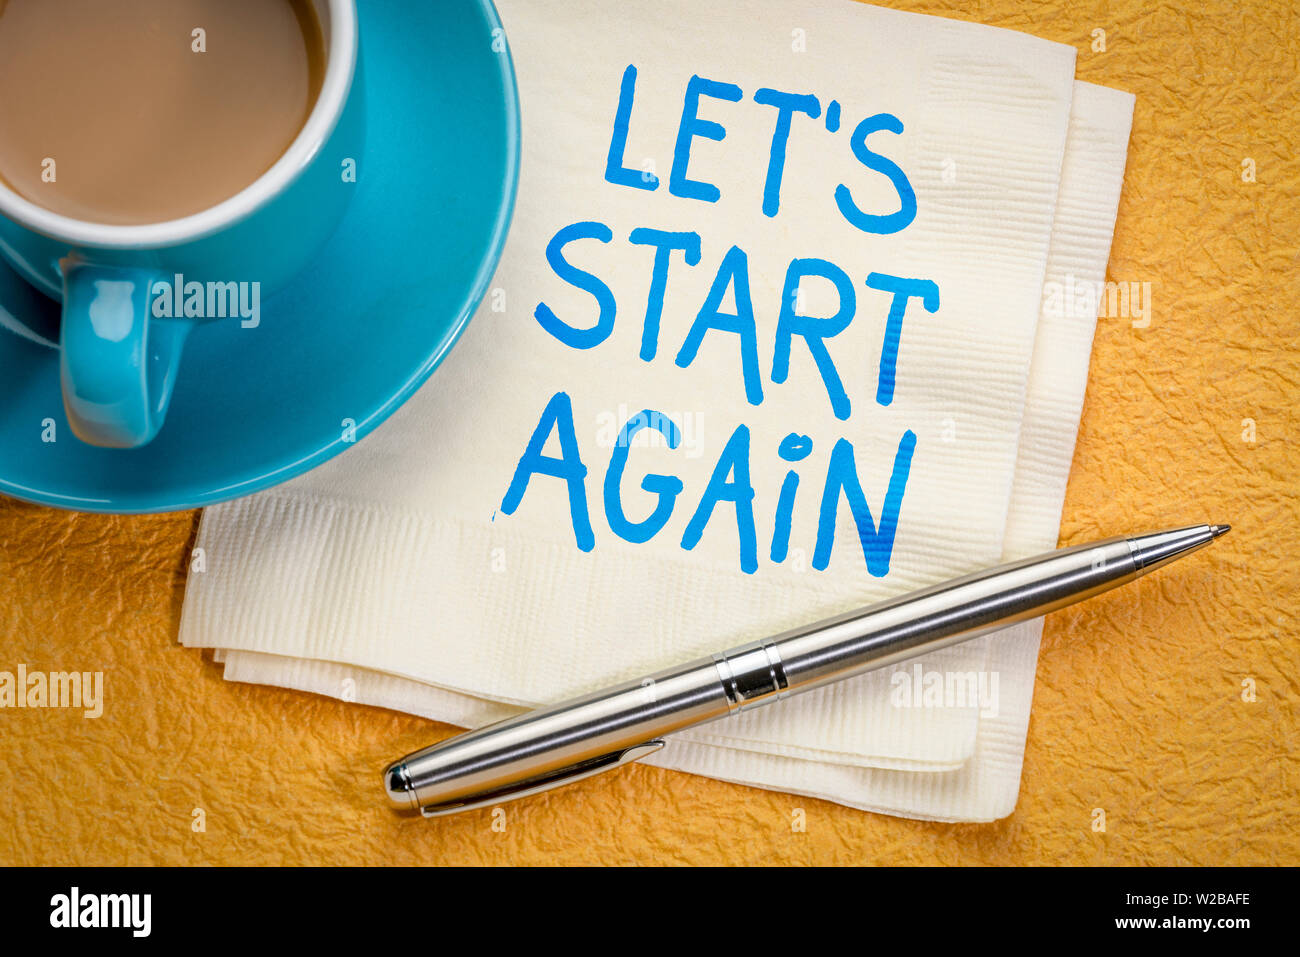 Let's start again note - motivational handwriting on a napkin with a cup of coffee Stock Photo